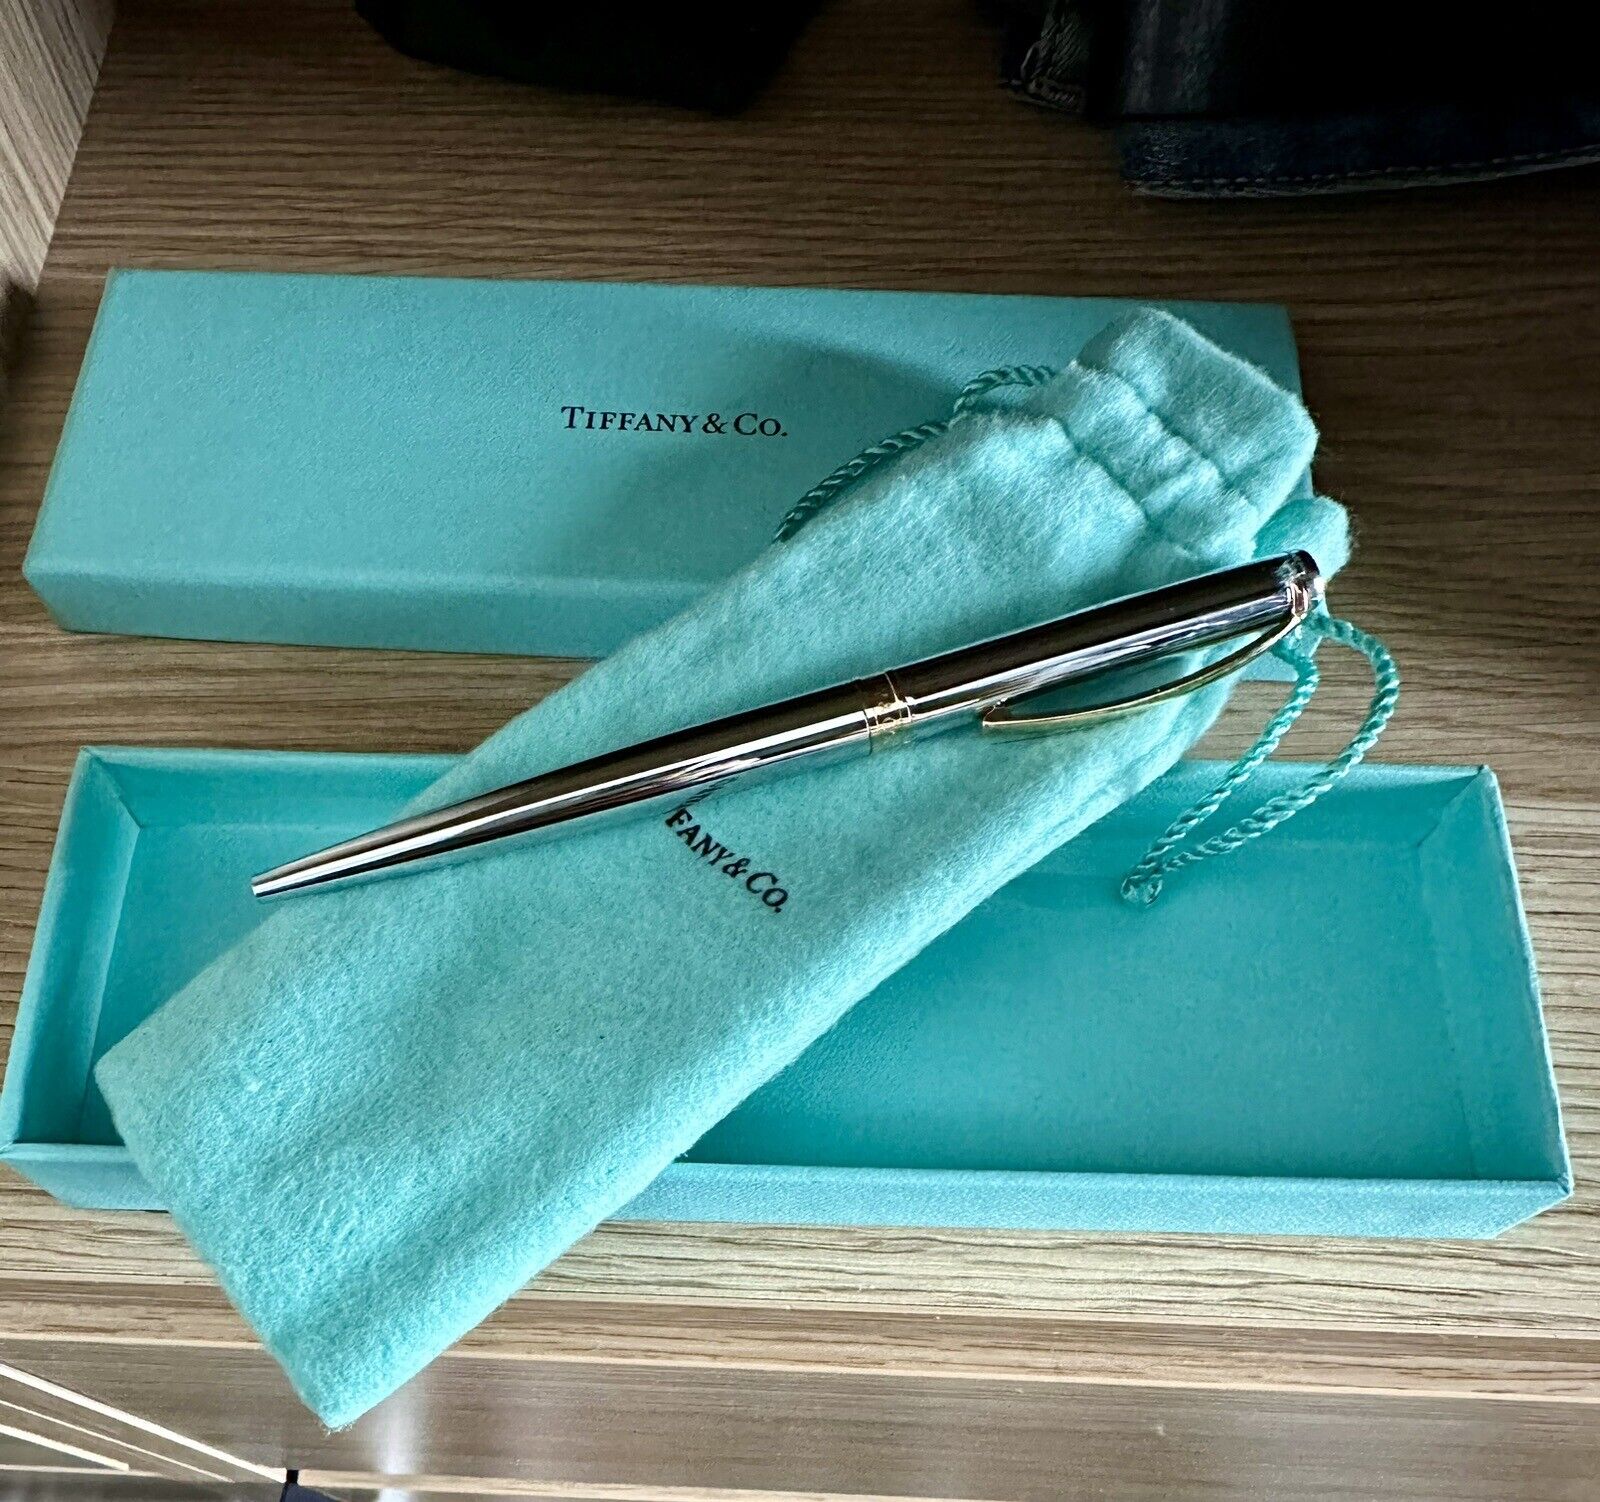 Tiffany And Co Stirling Silver Pen